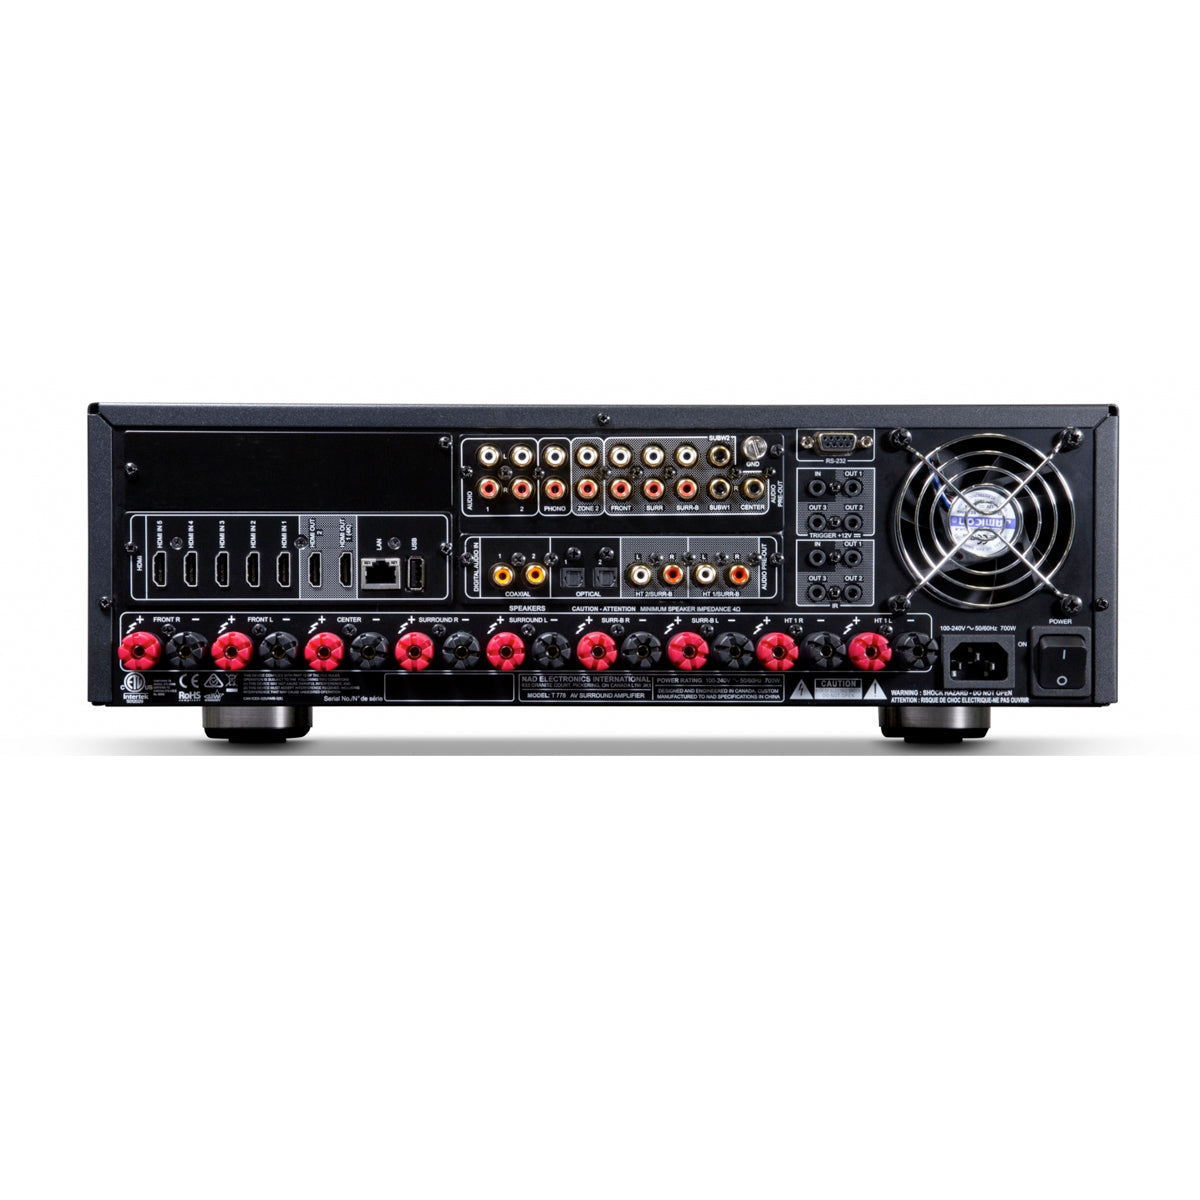 NAD T778 AV Receiver - The Audio Experts